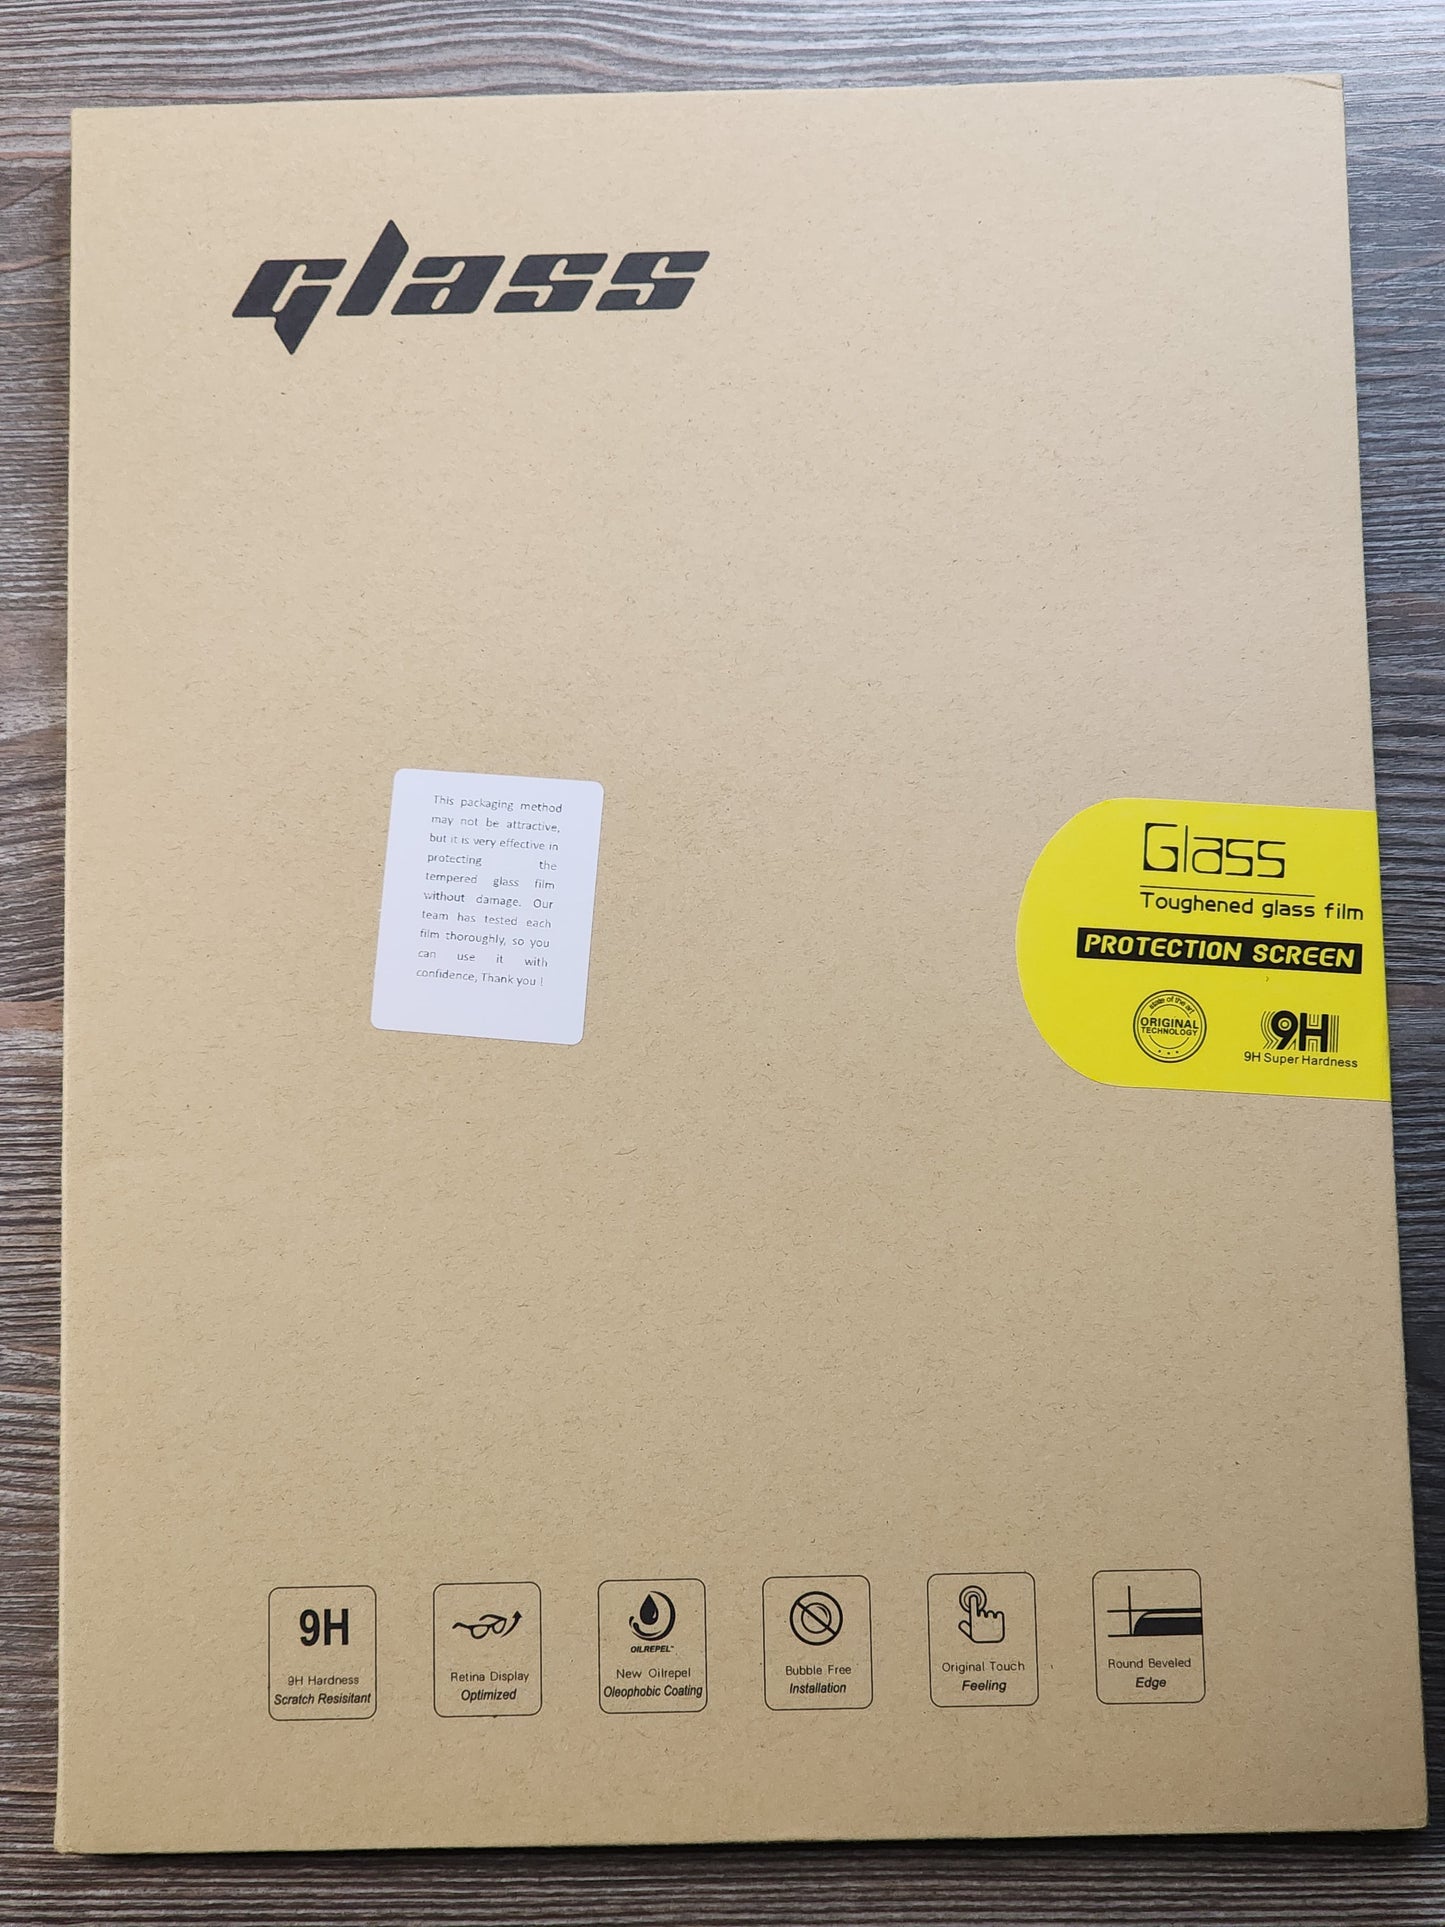 13.3 Inch Laptop Screen Protector (11 9/16" x 6 1/2")